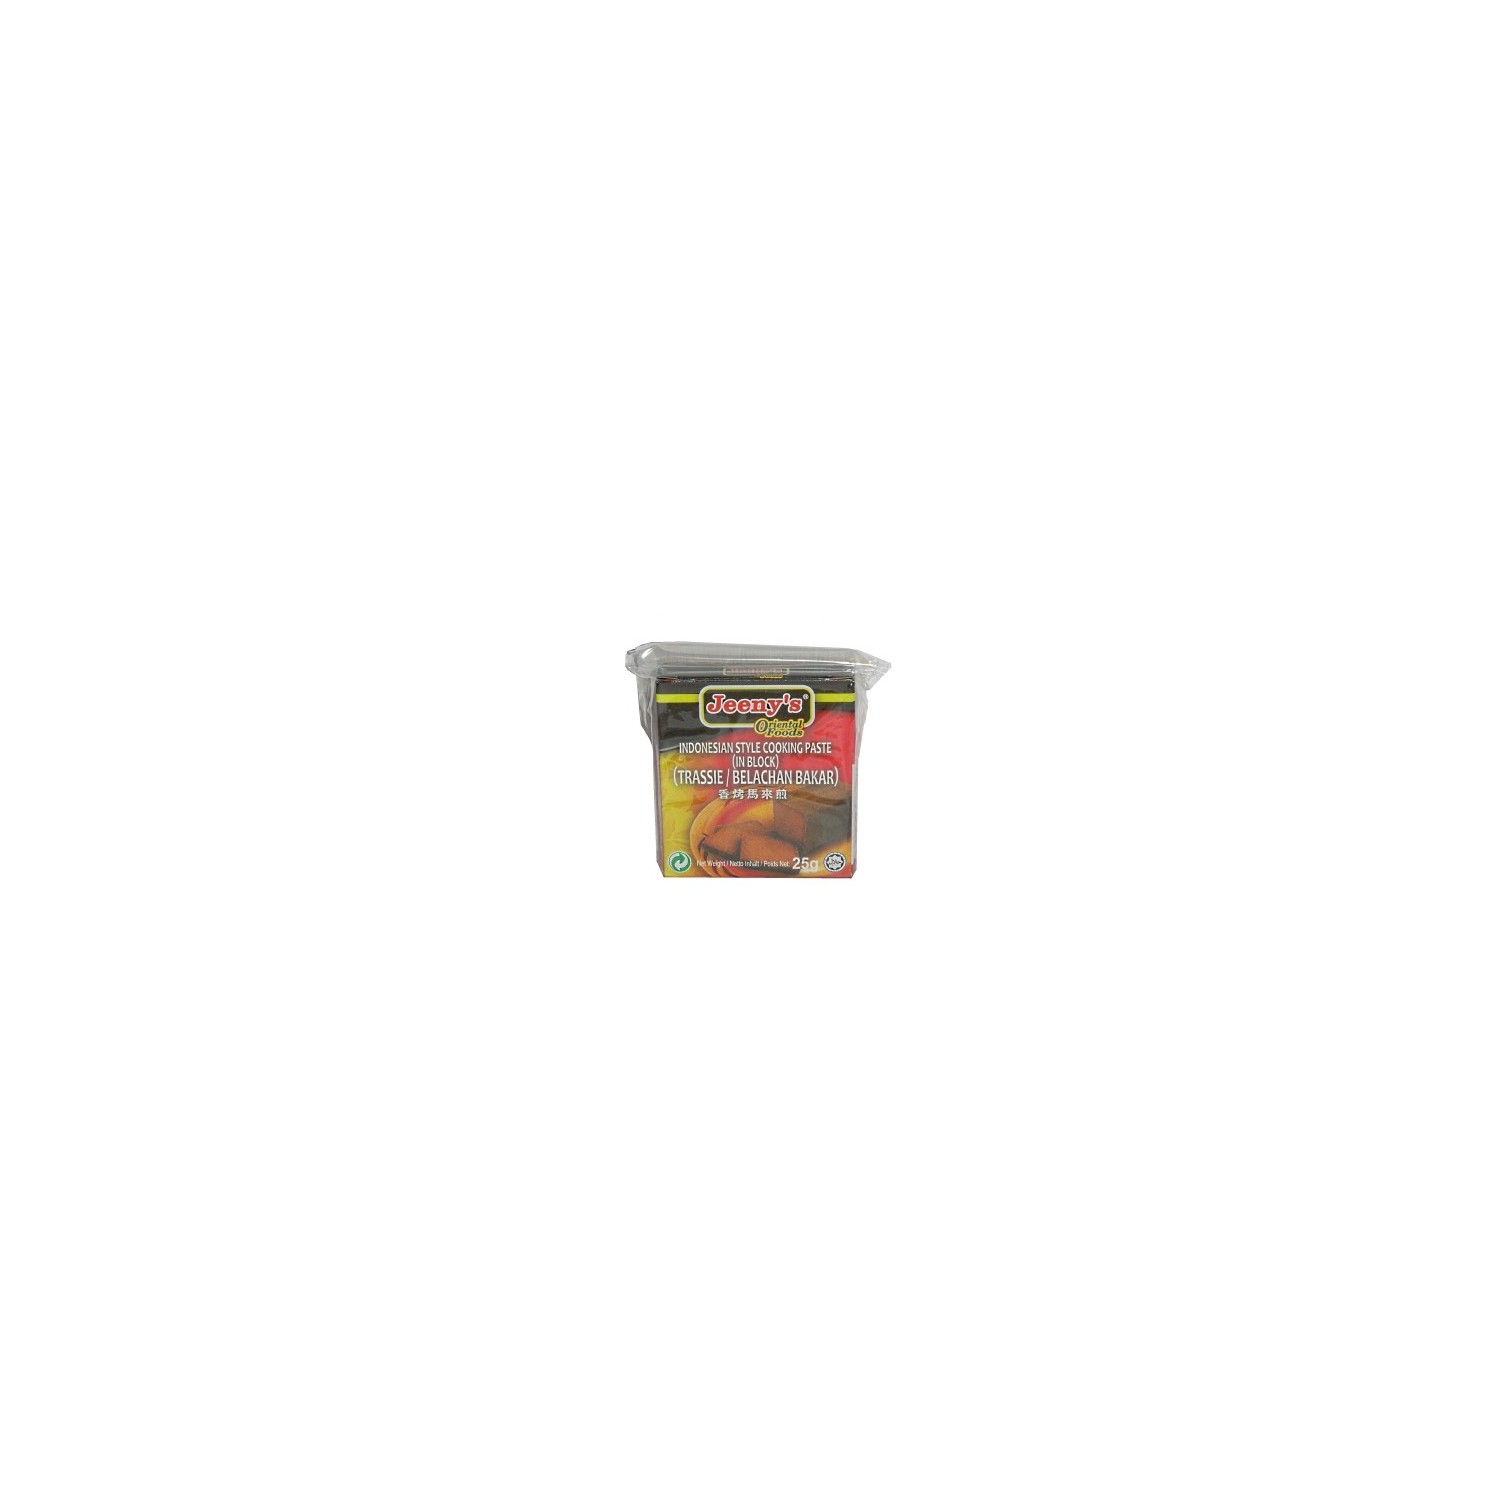 Jeeny's - 25g - Indonesian Cooking Paste